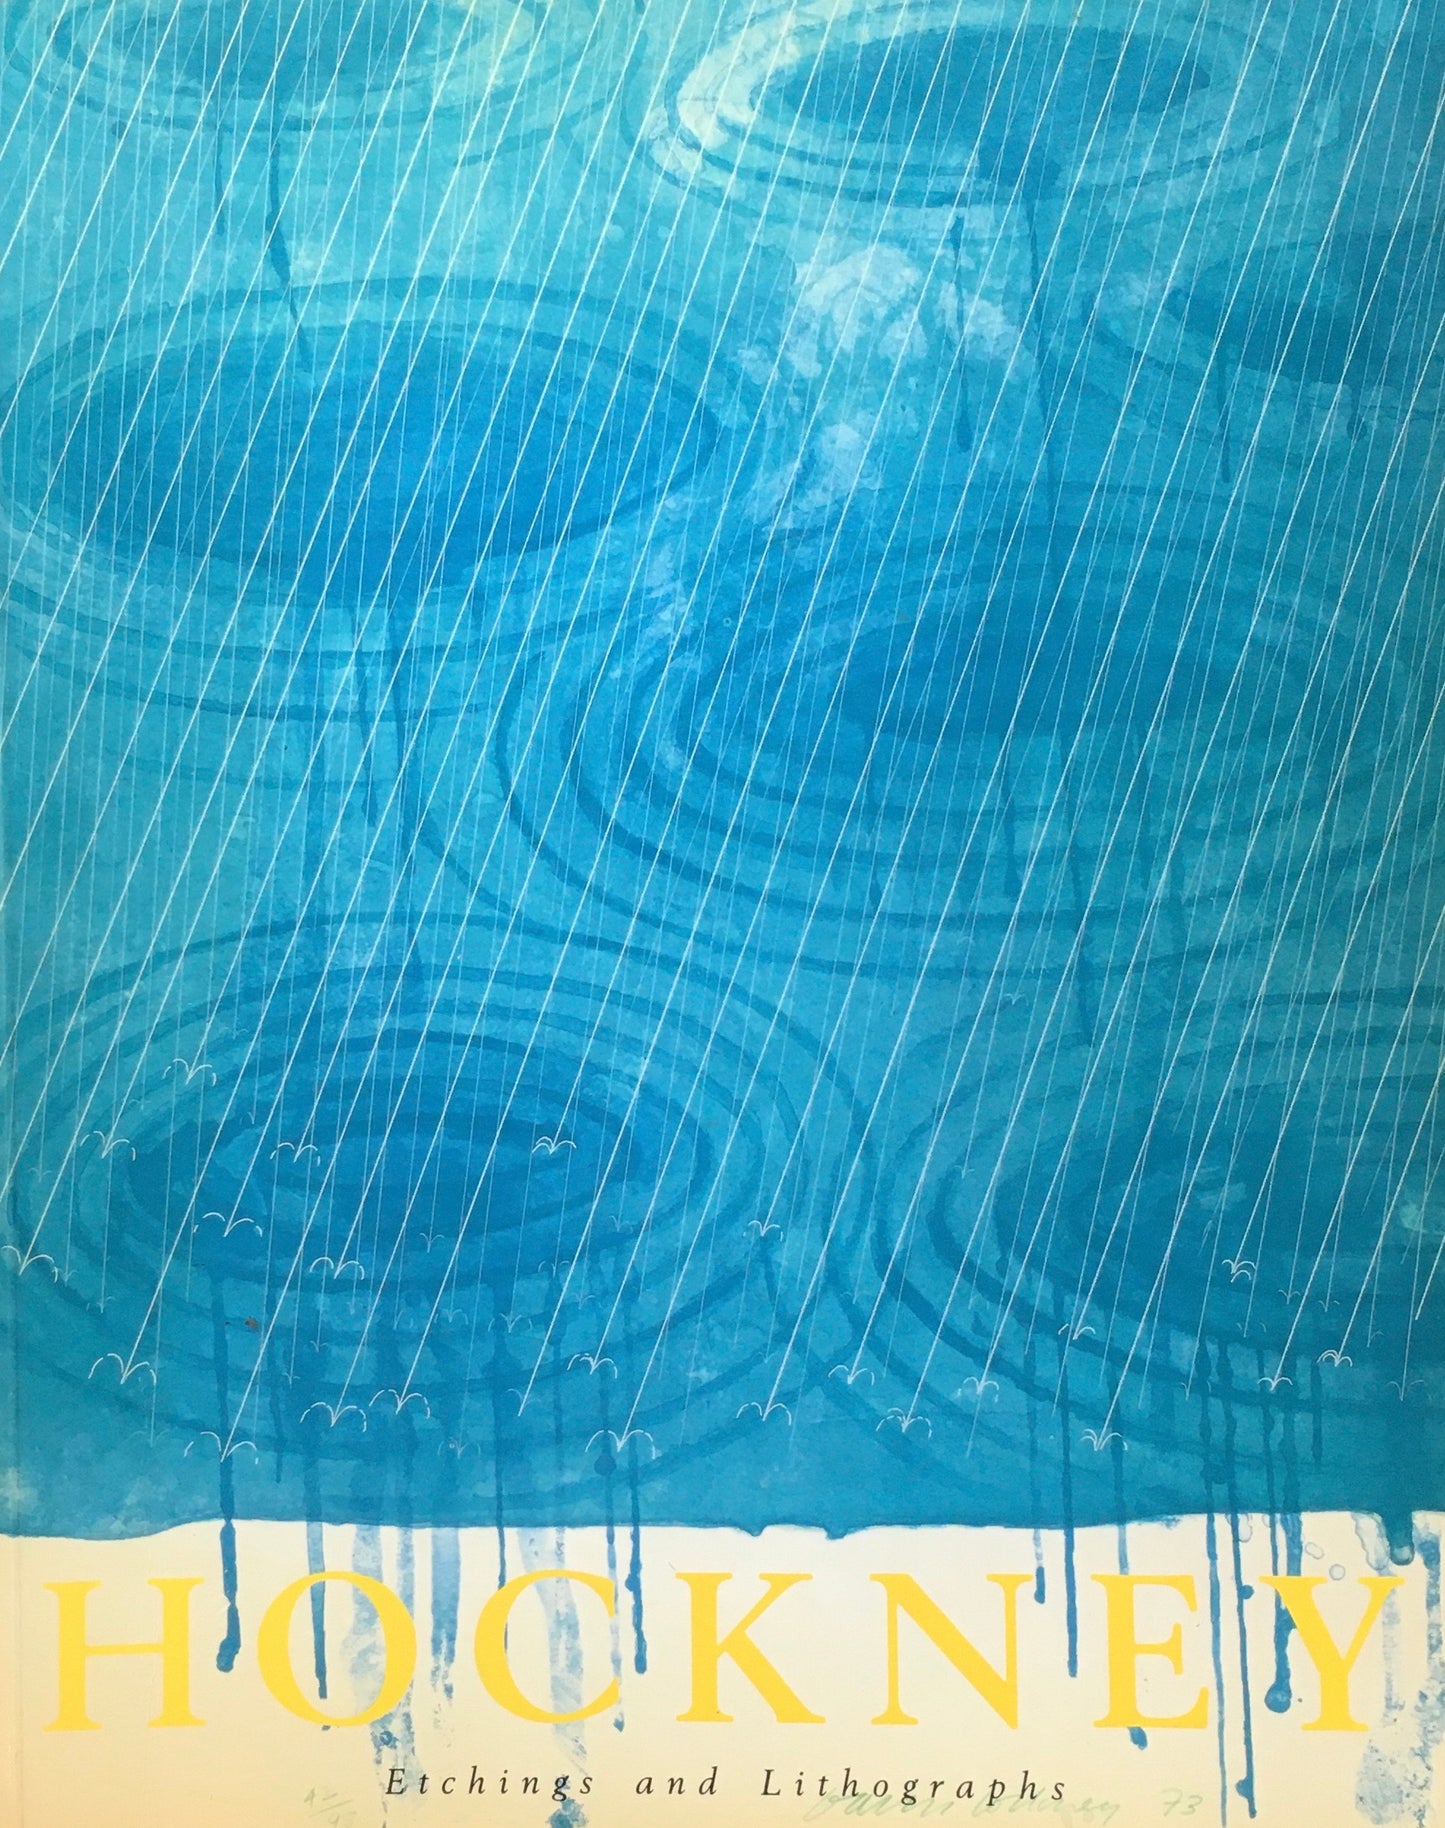 DAVID HOCKNEY　Etchings and Lithographs　デイヴィッド・ホックニー